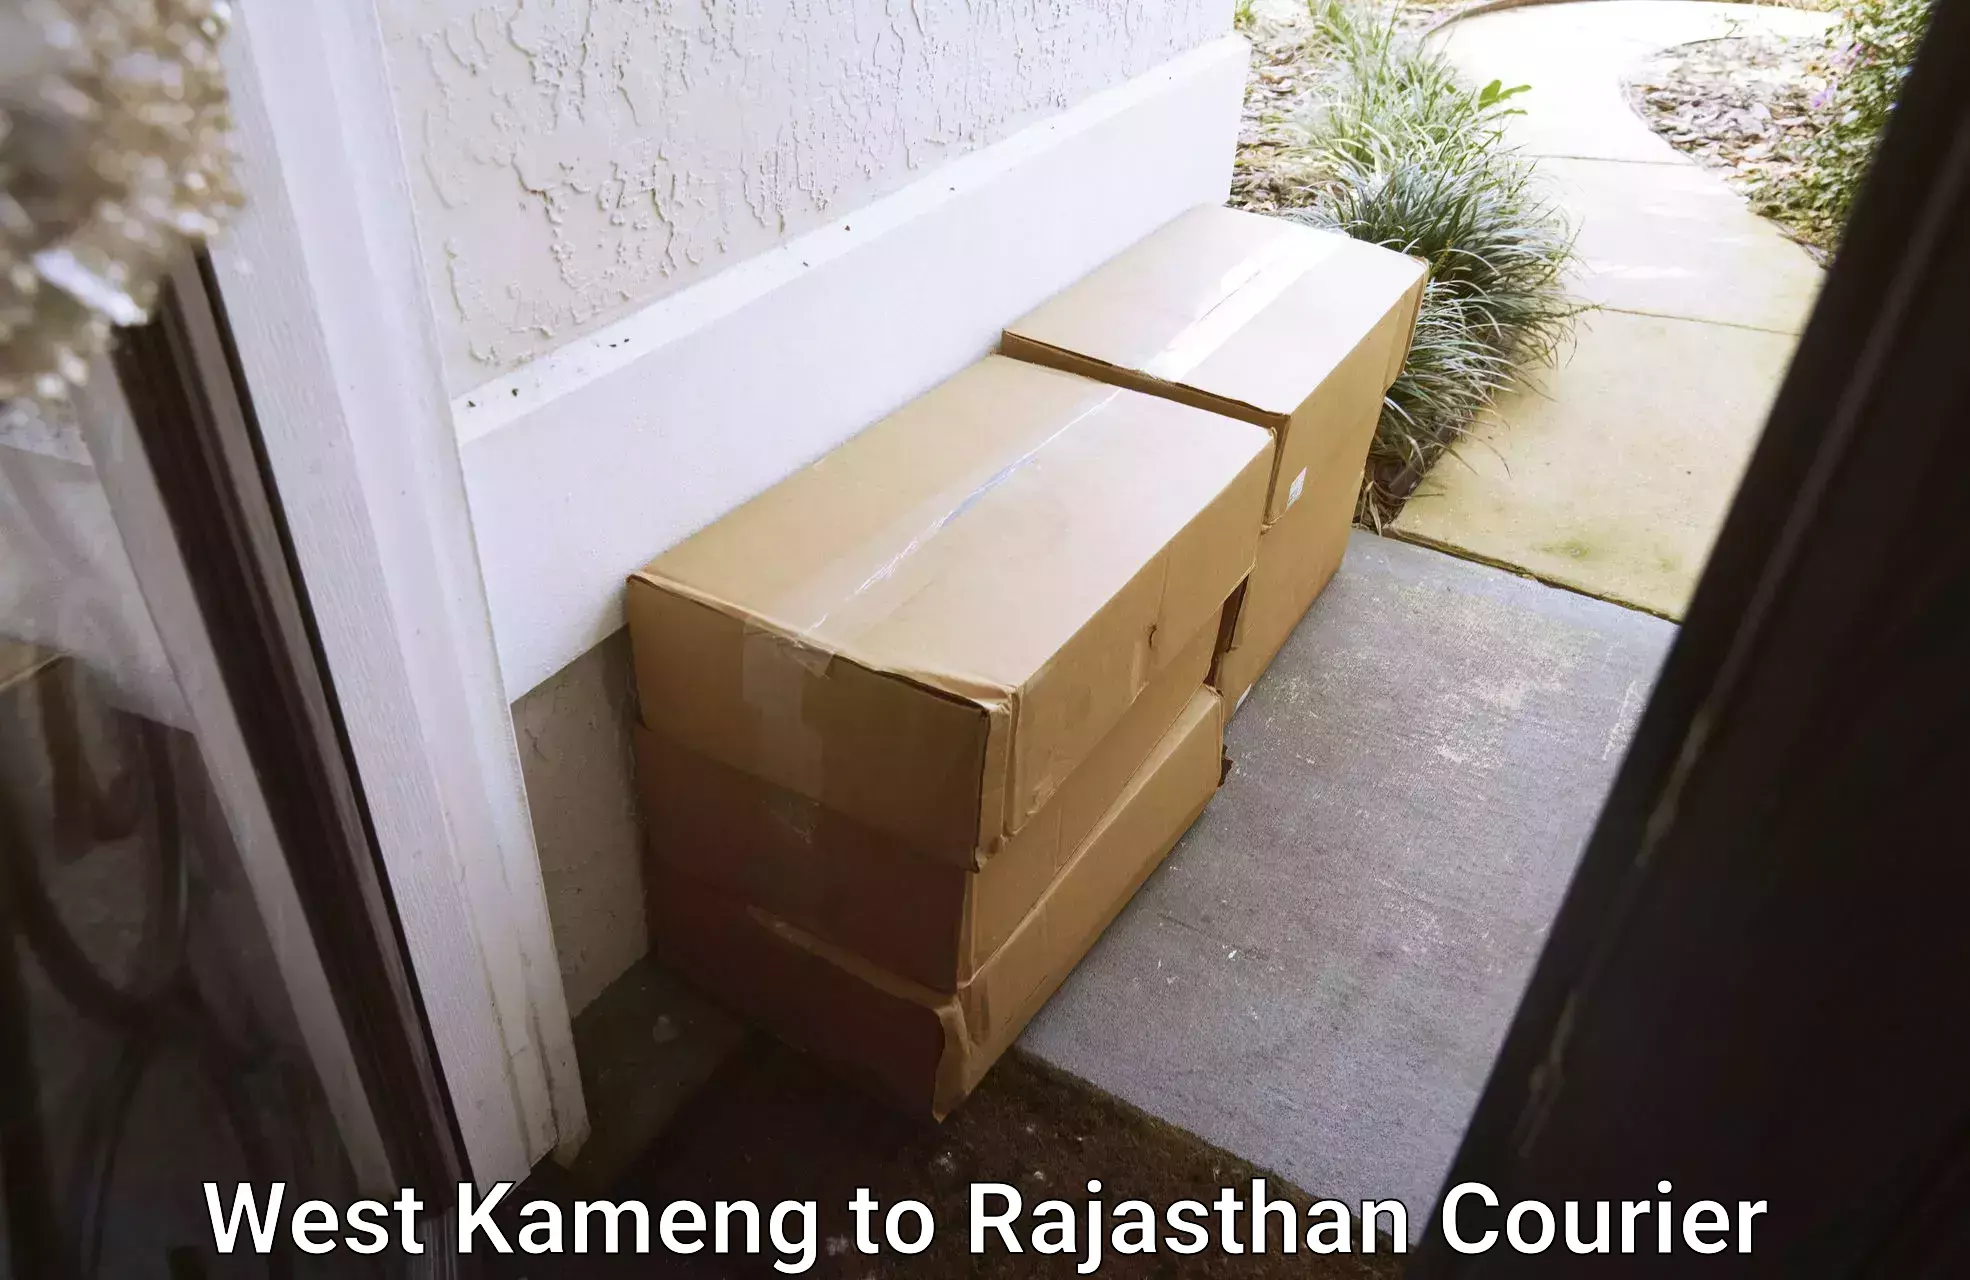 Reliable courier service West Kameng to Laxmangarh